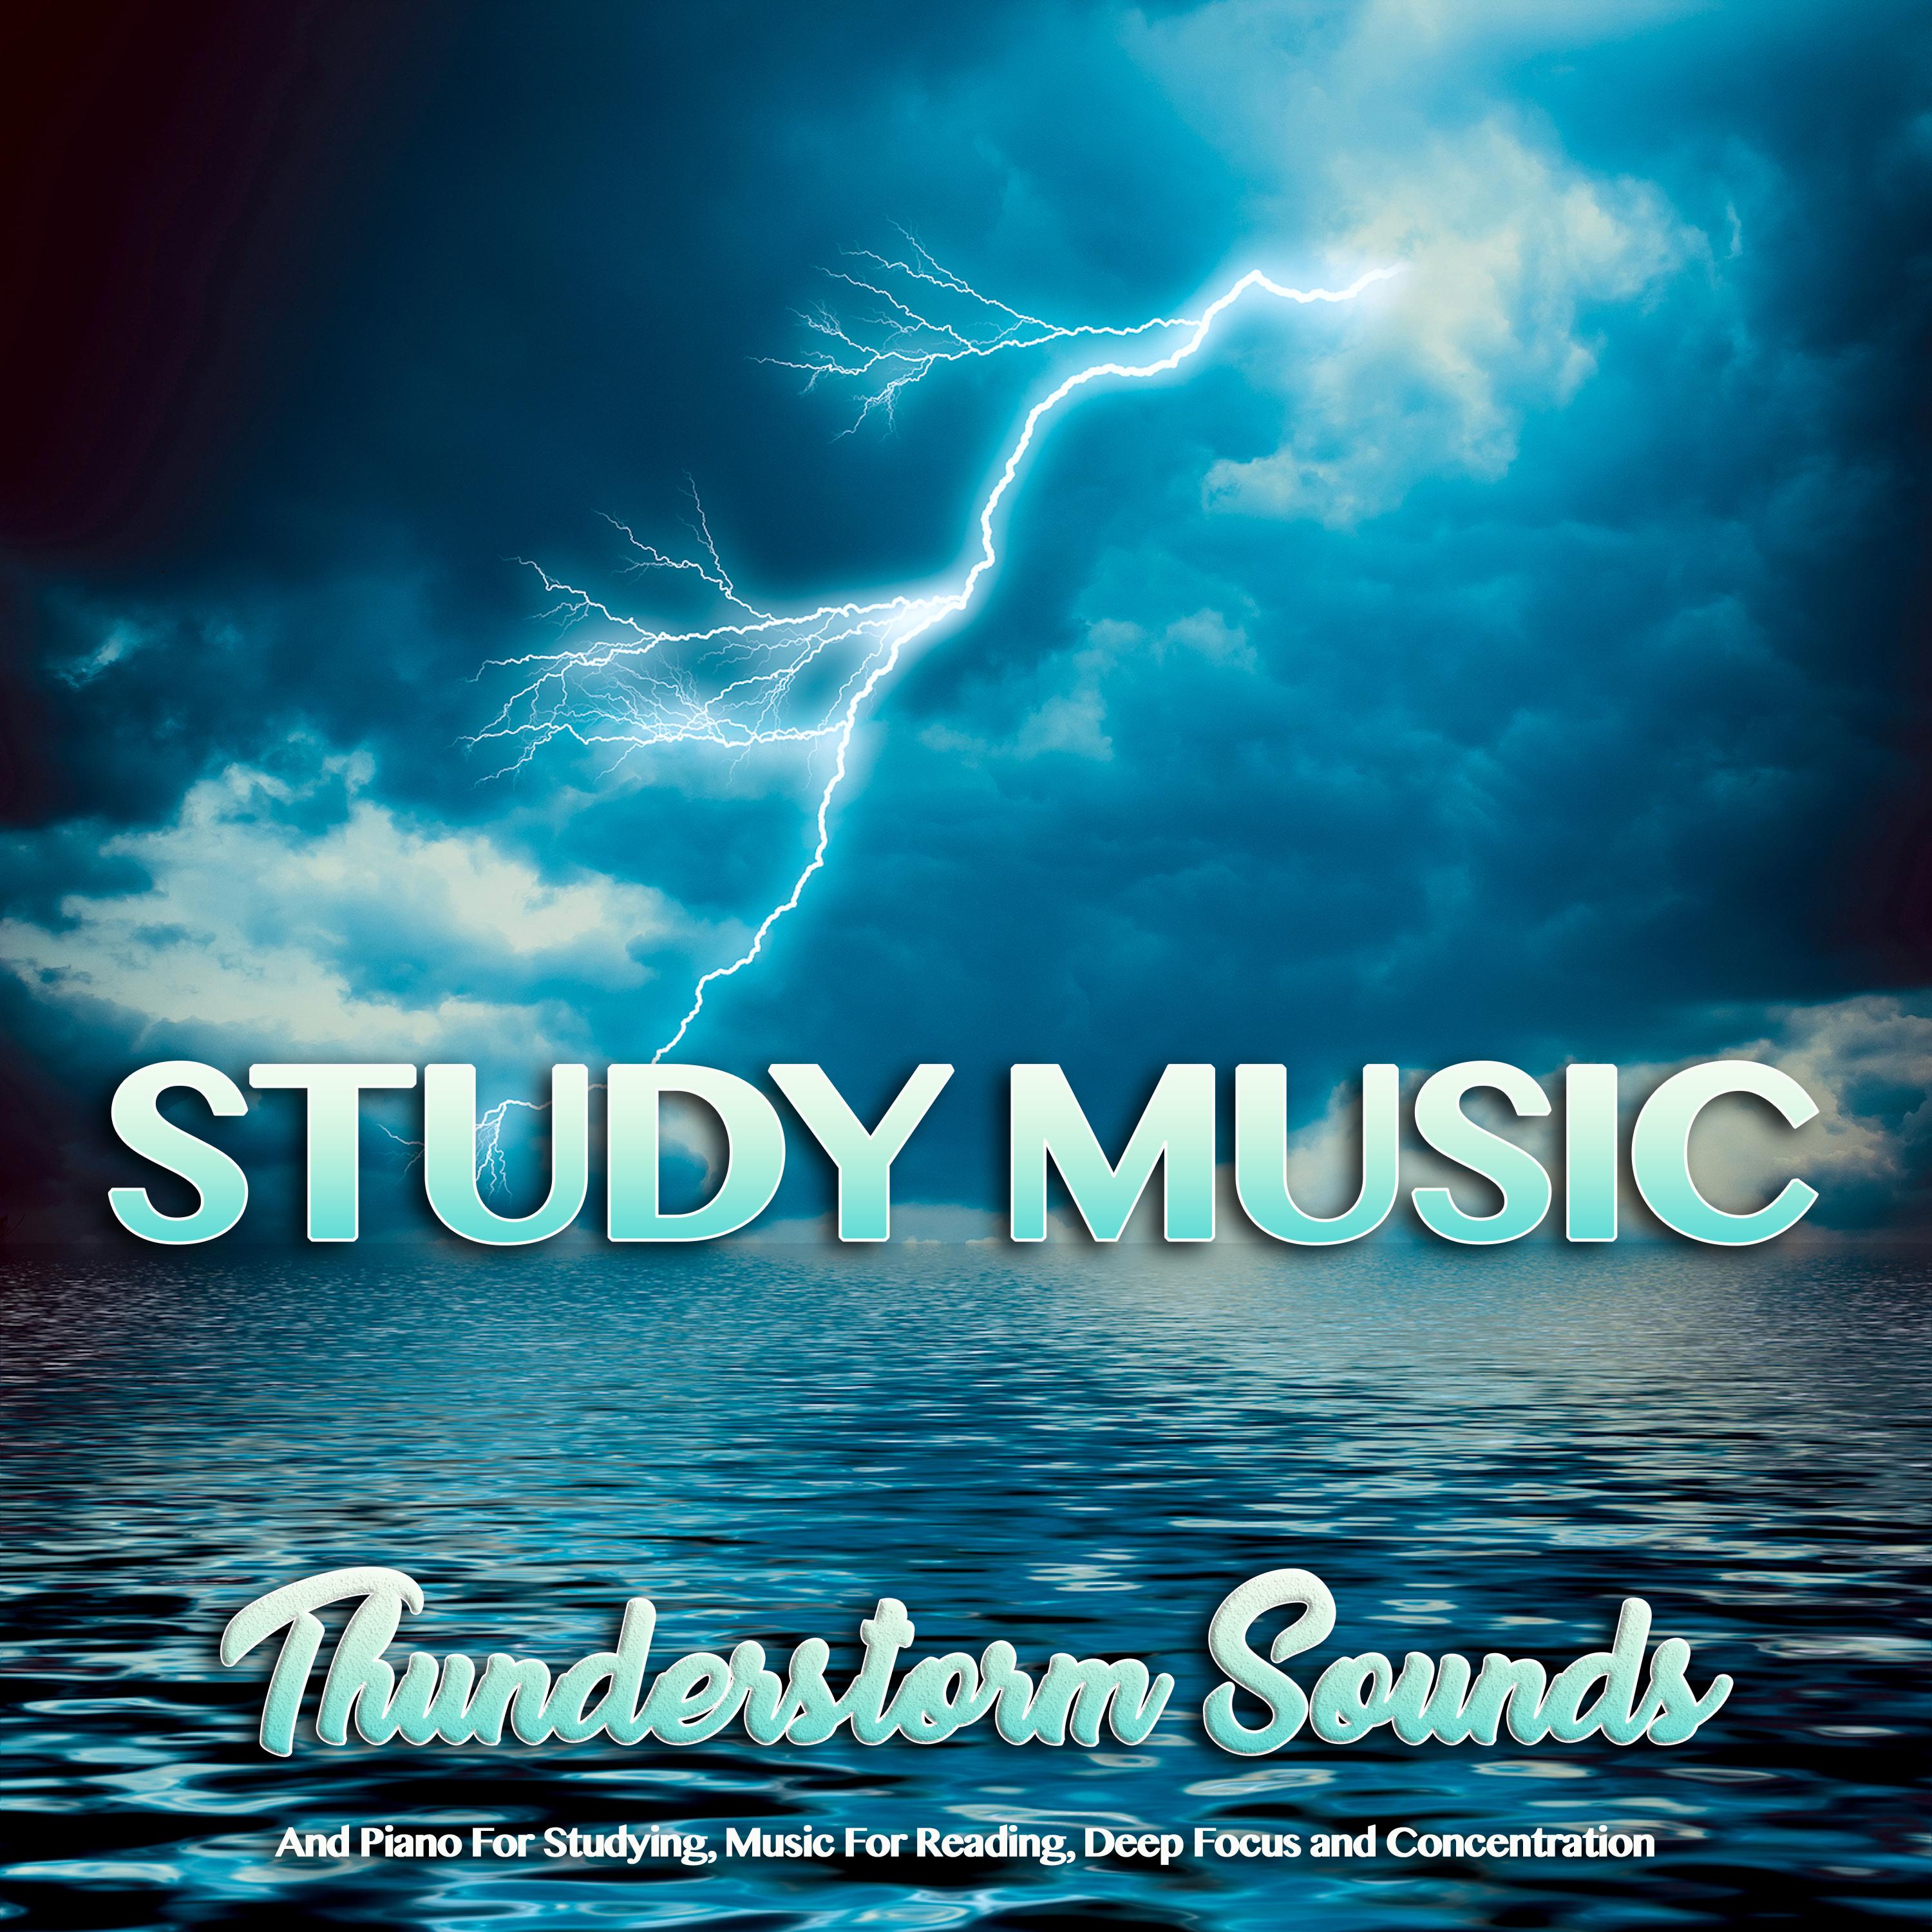 Sounds of a Thunderstorm for Concentration